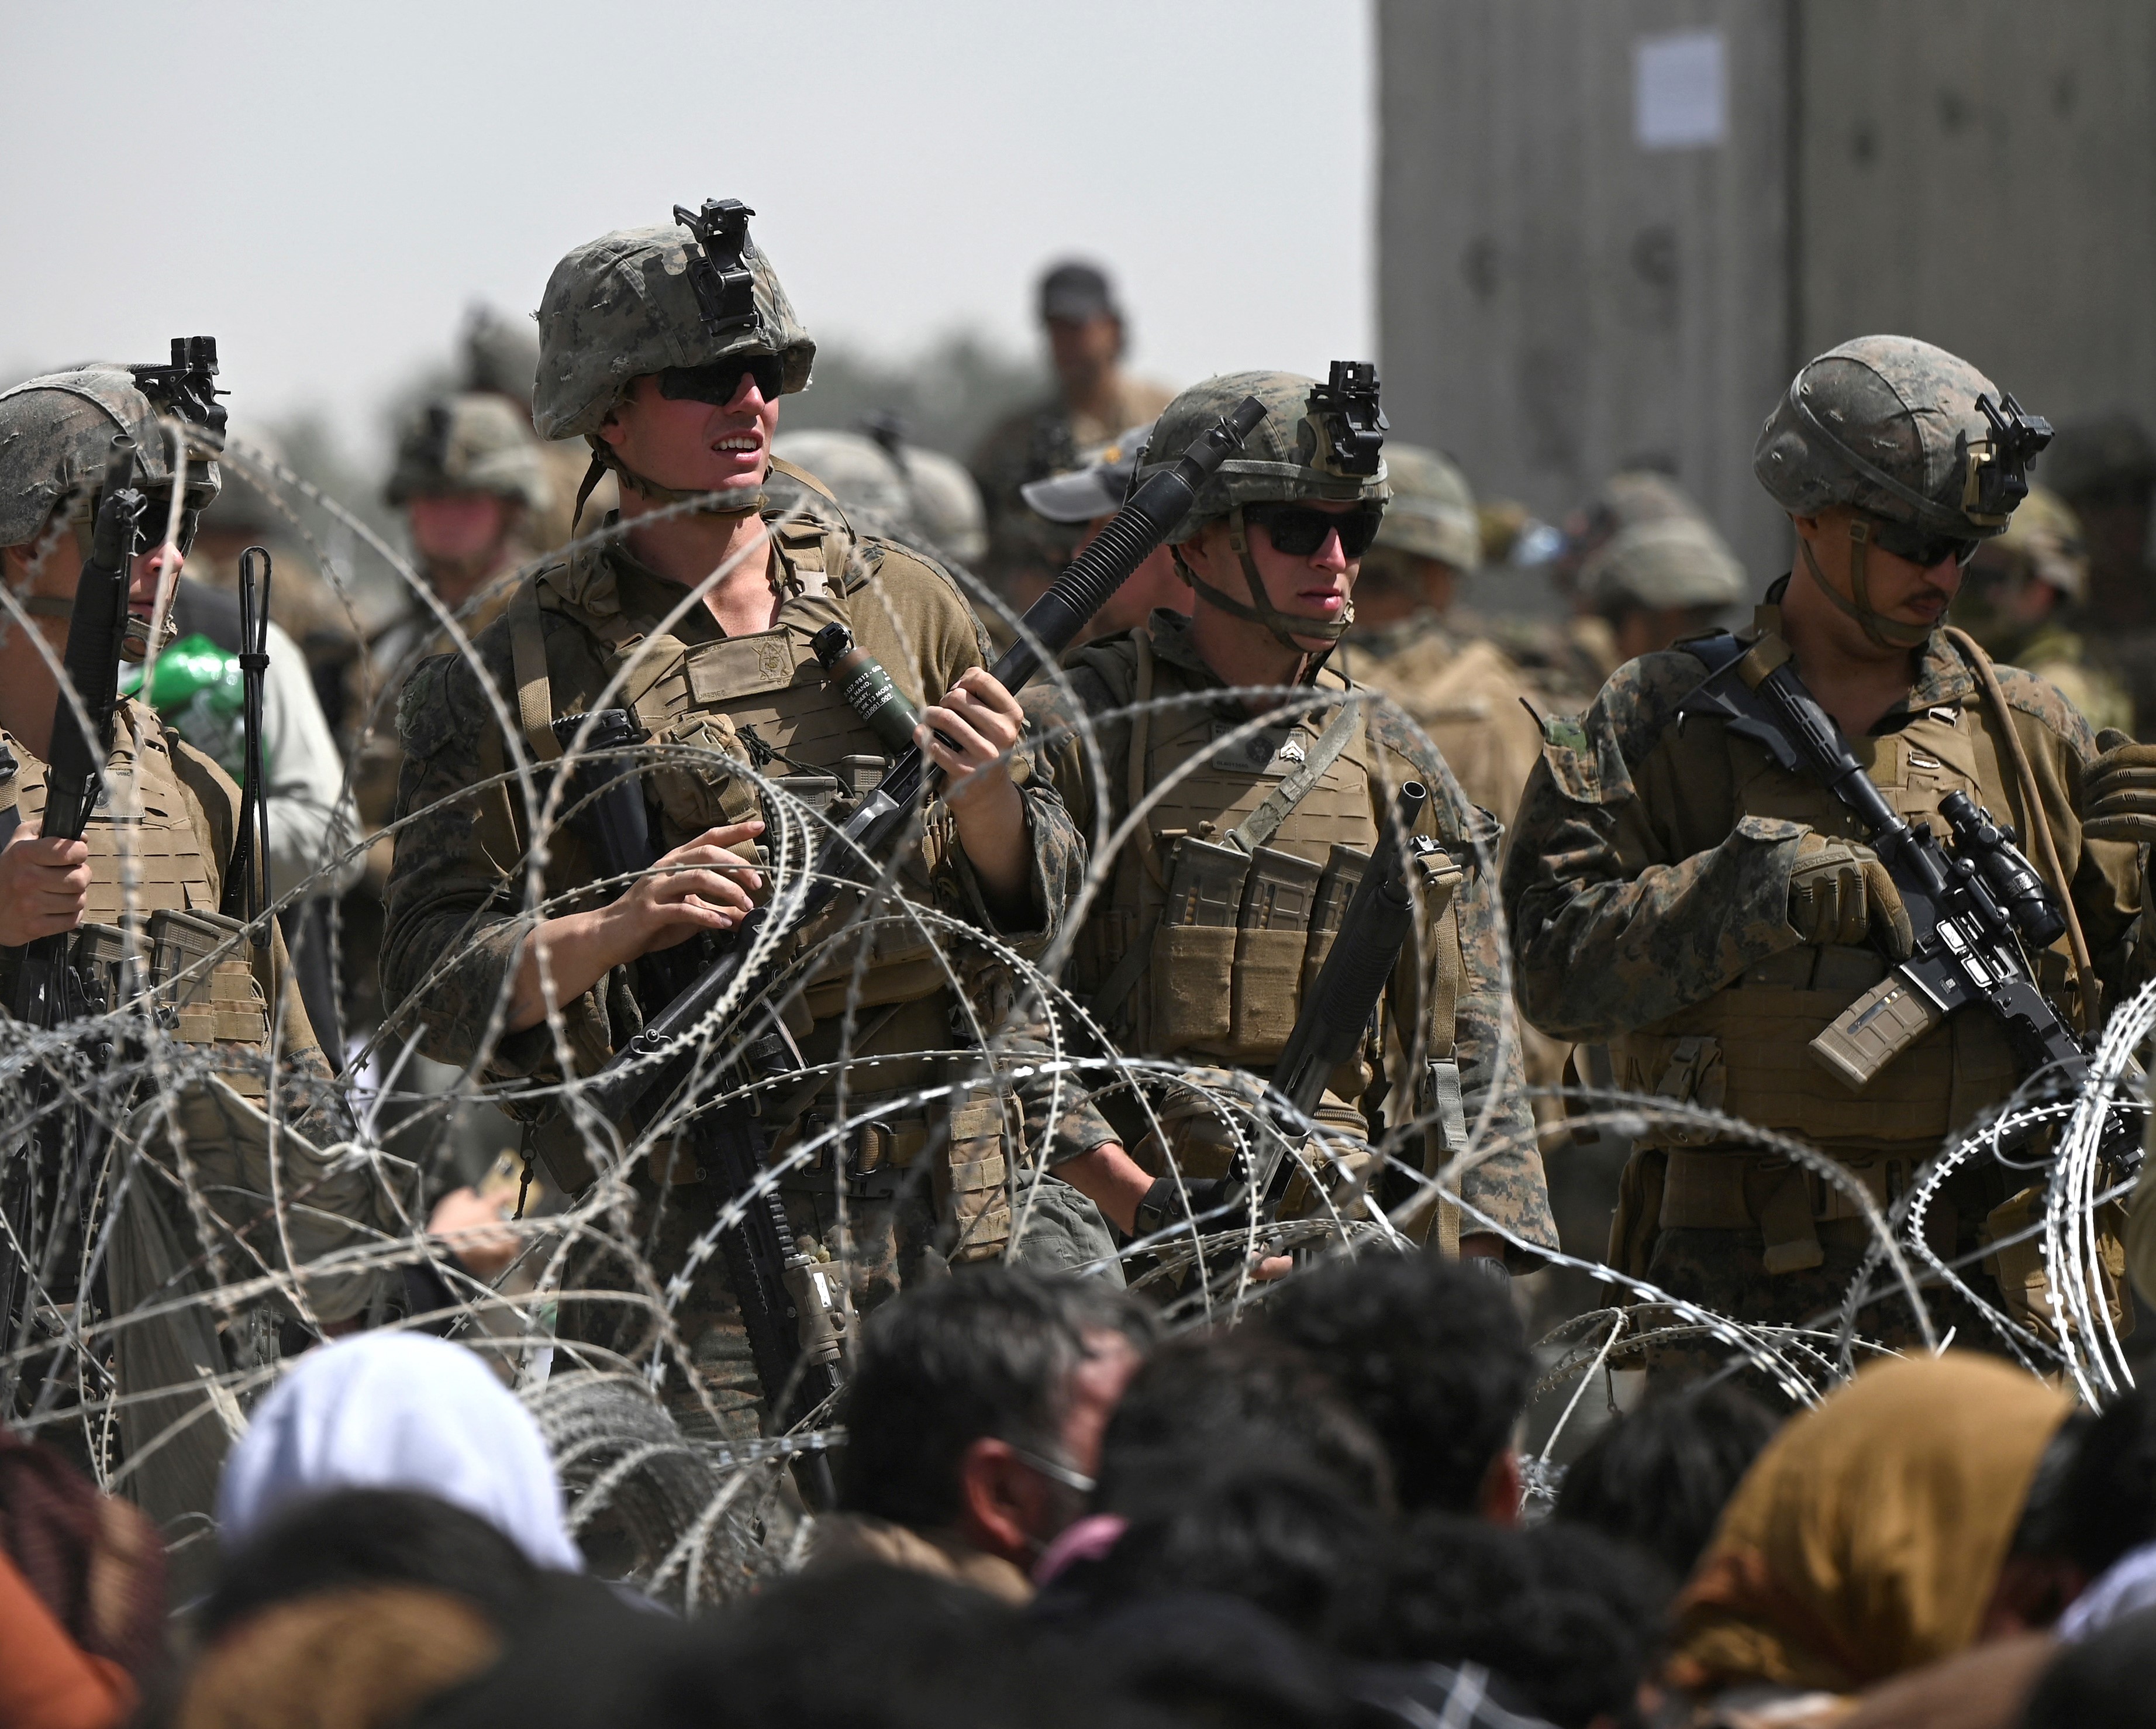 US soldiers stand guard behind barbed wire as Afghans sit on a roadside near the military part of the airport in Kabul on 20 August, 2021(AFP)